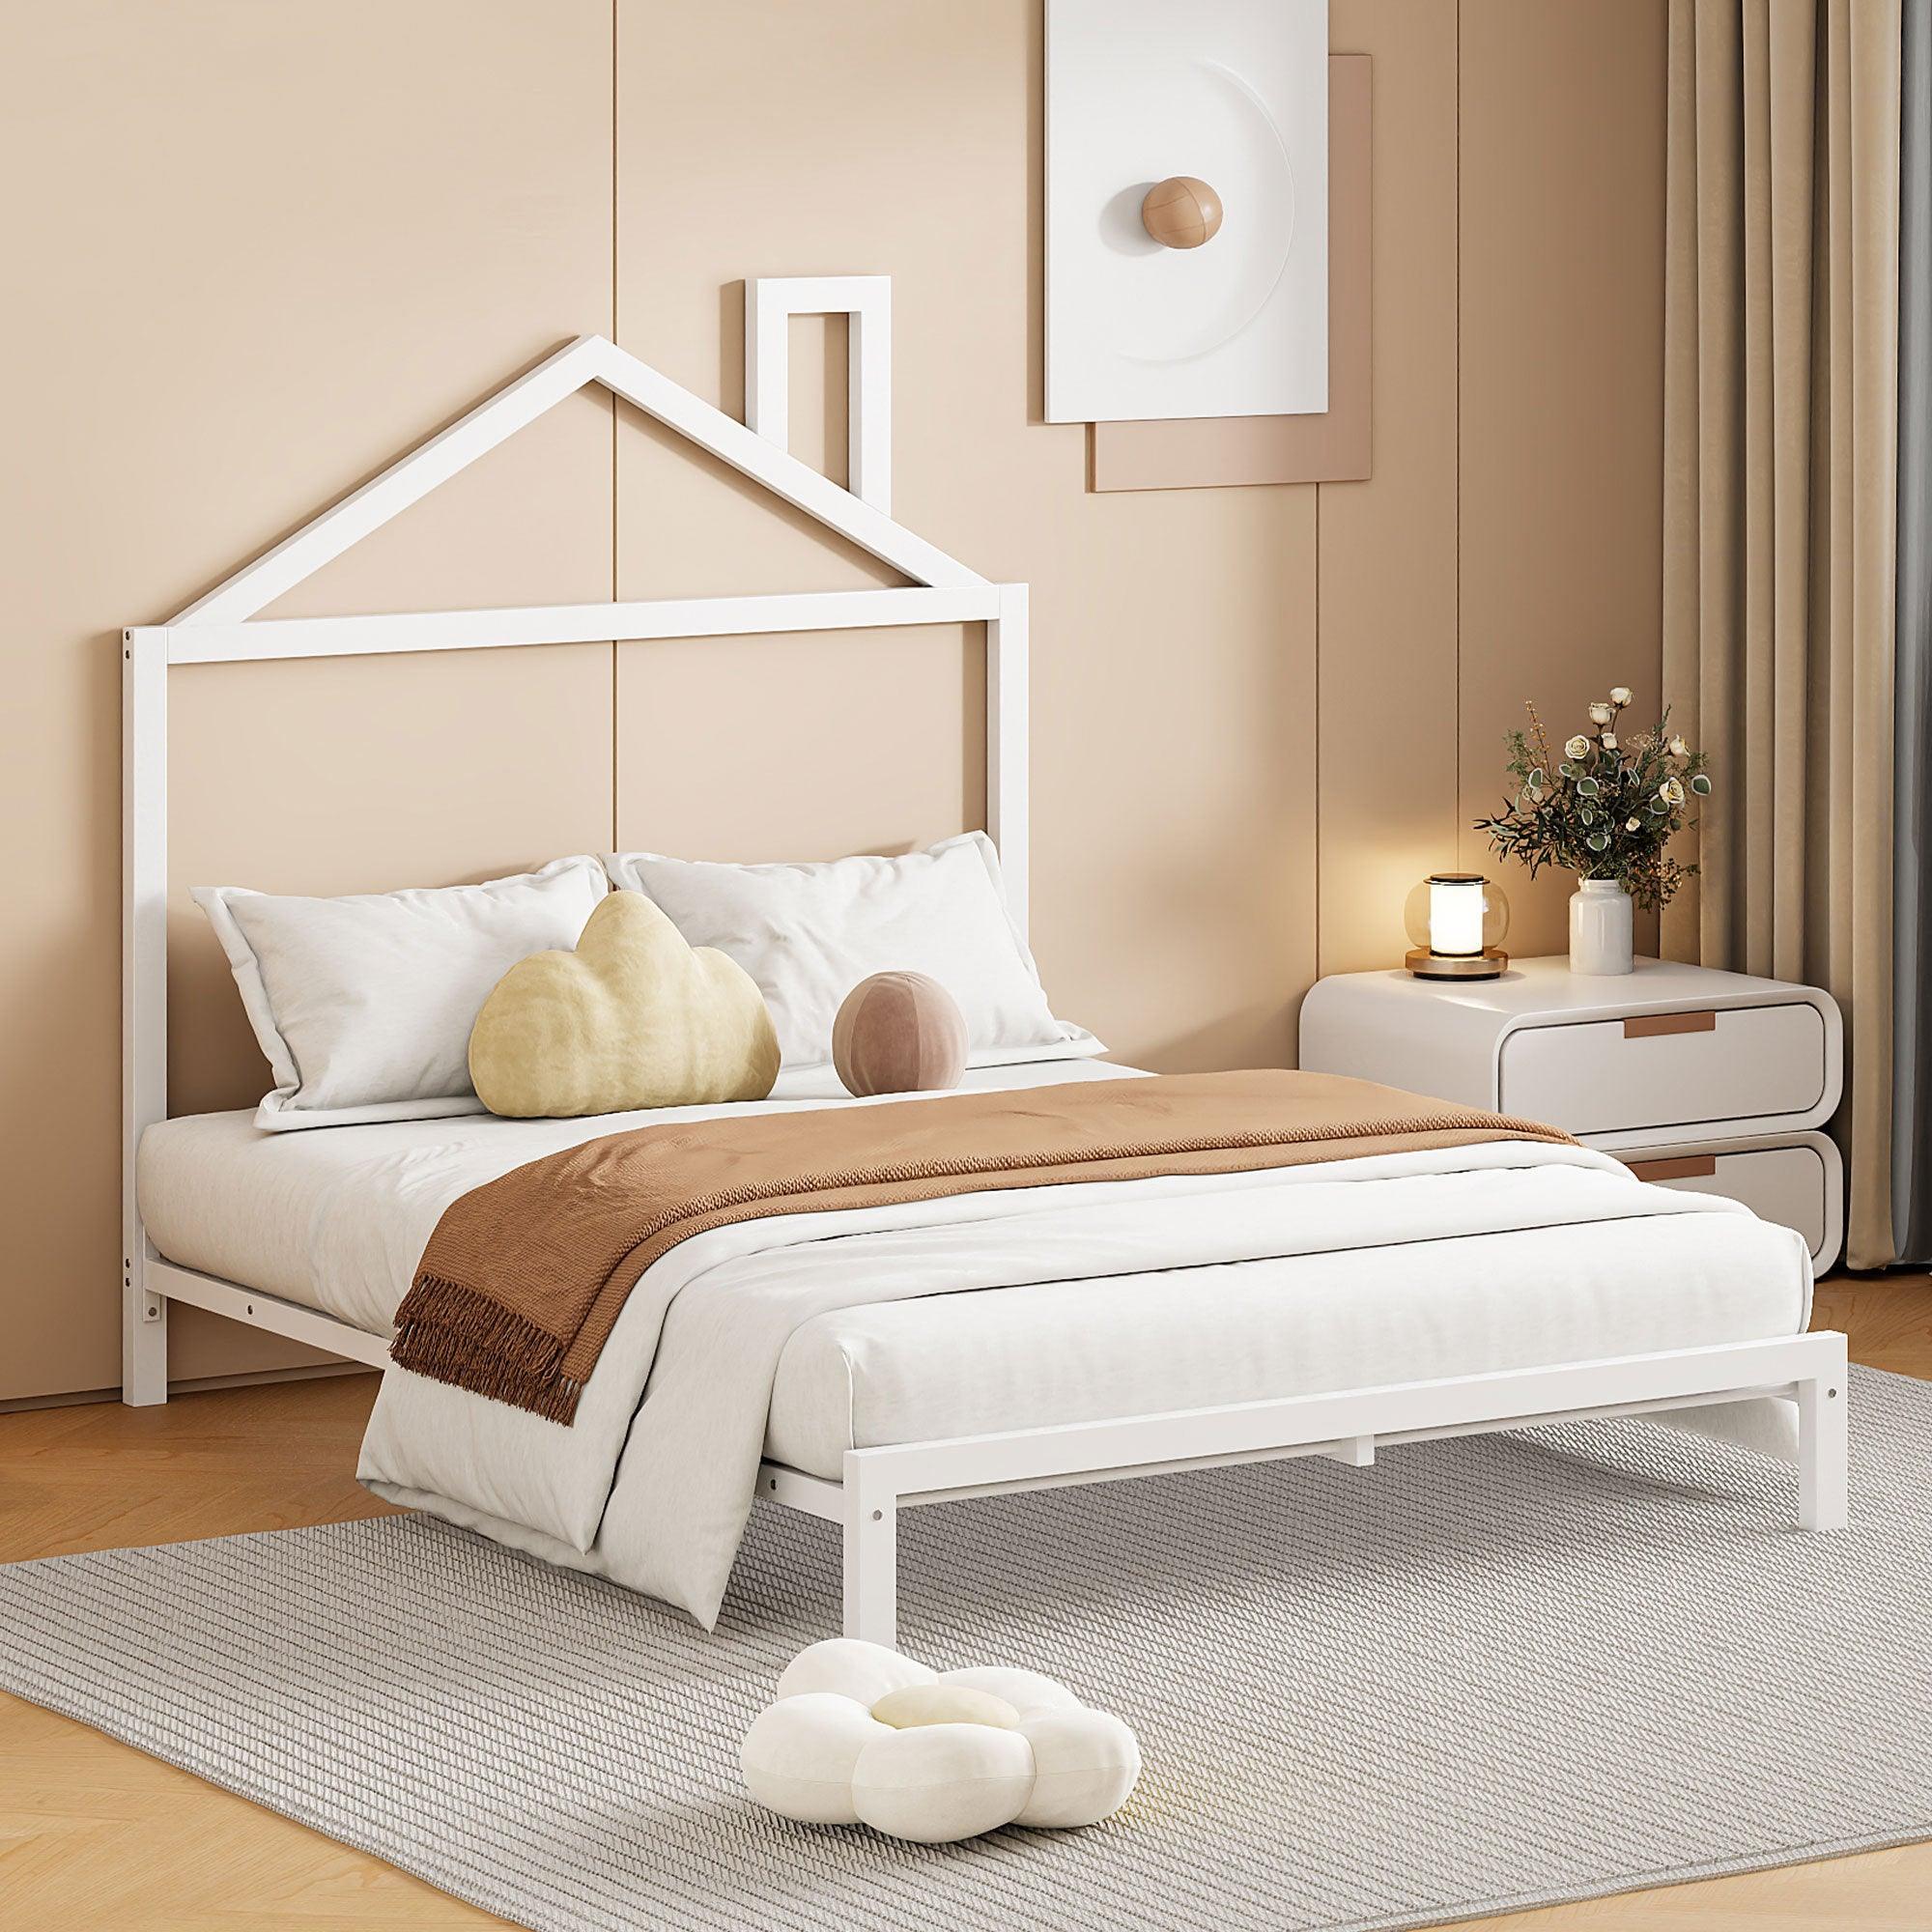 🆓🚛 Full Size Metal Platform Bed With House-Shaped Headboard Design, White